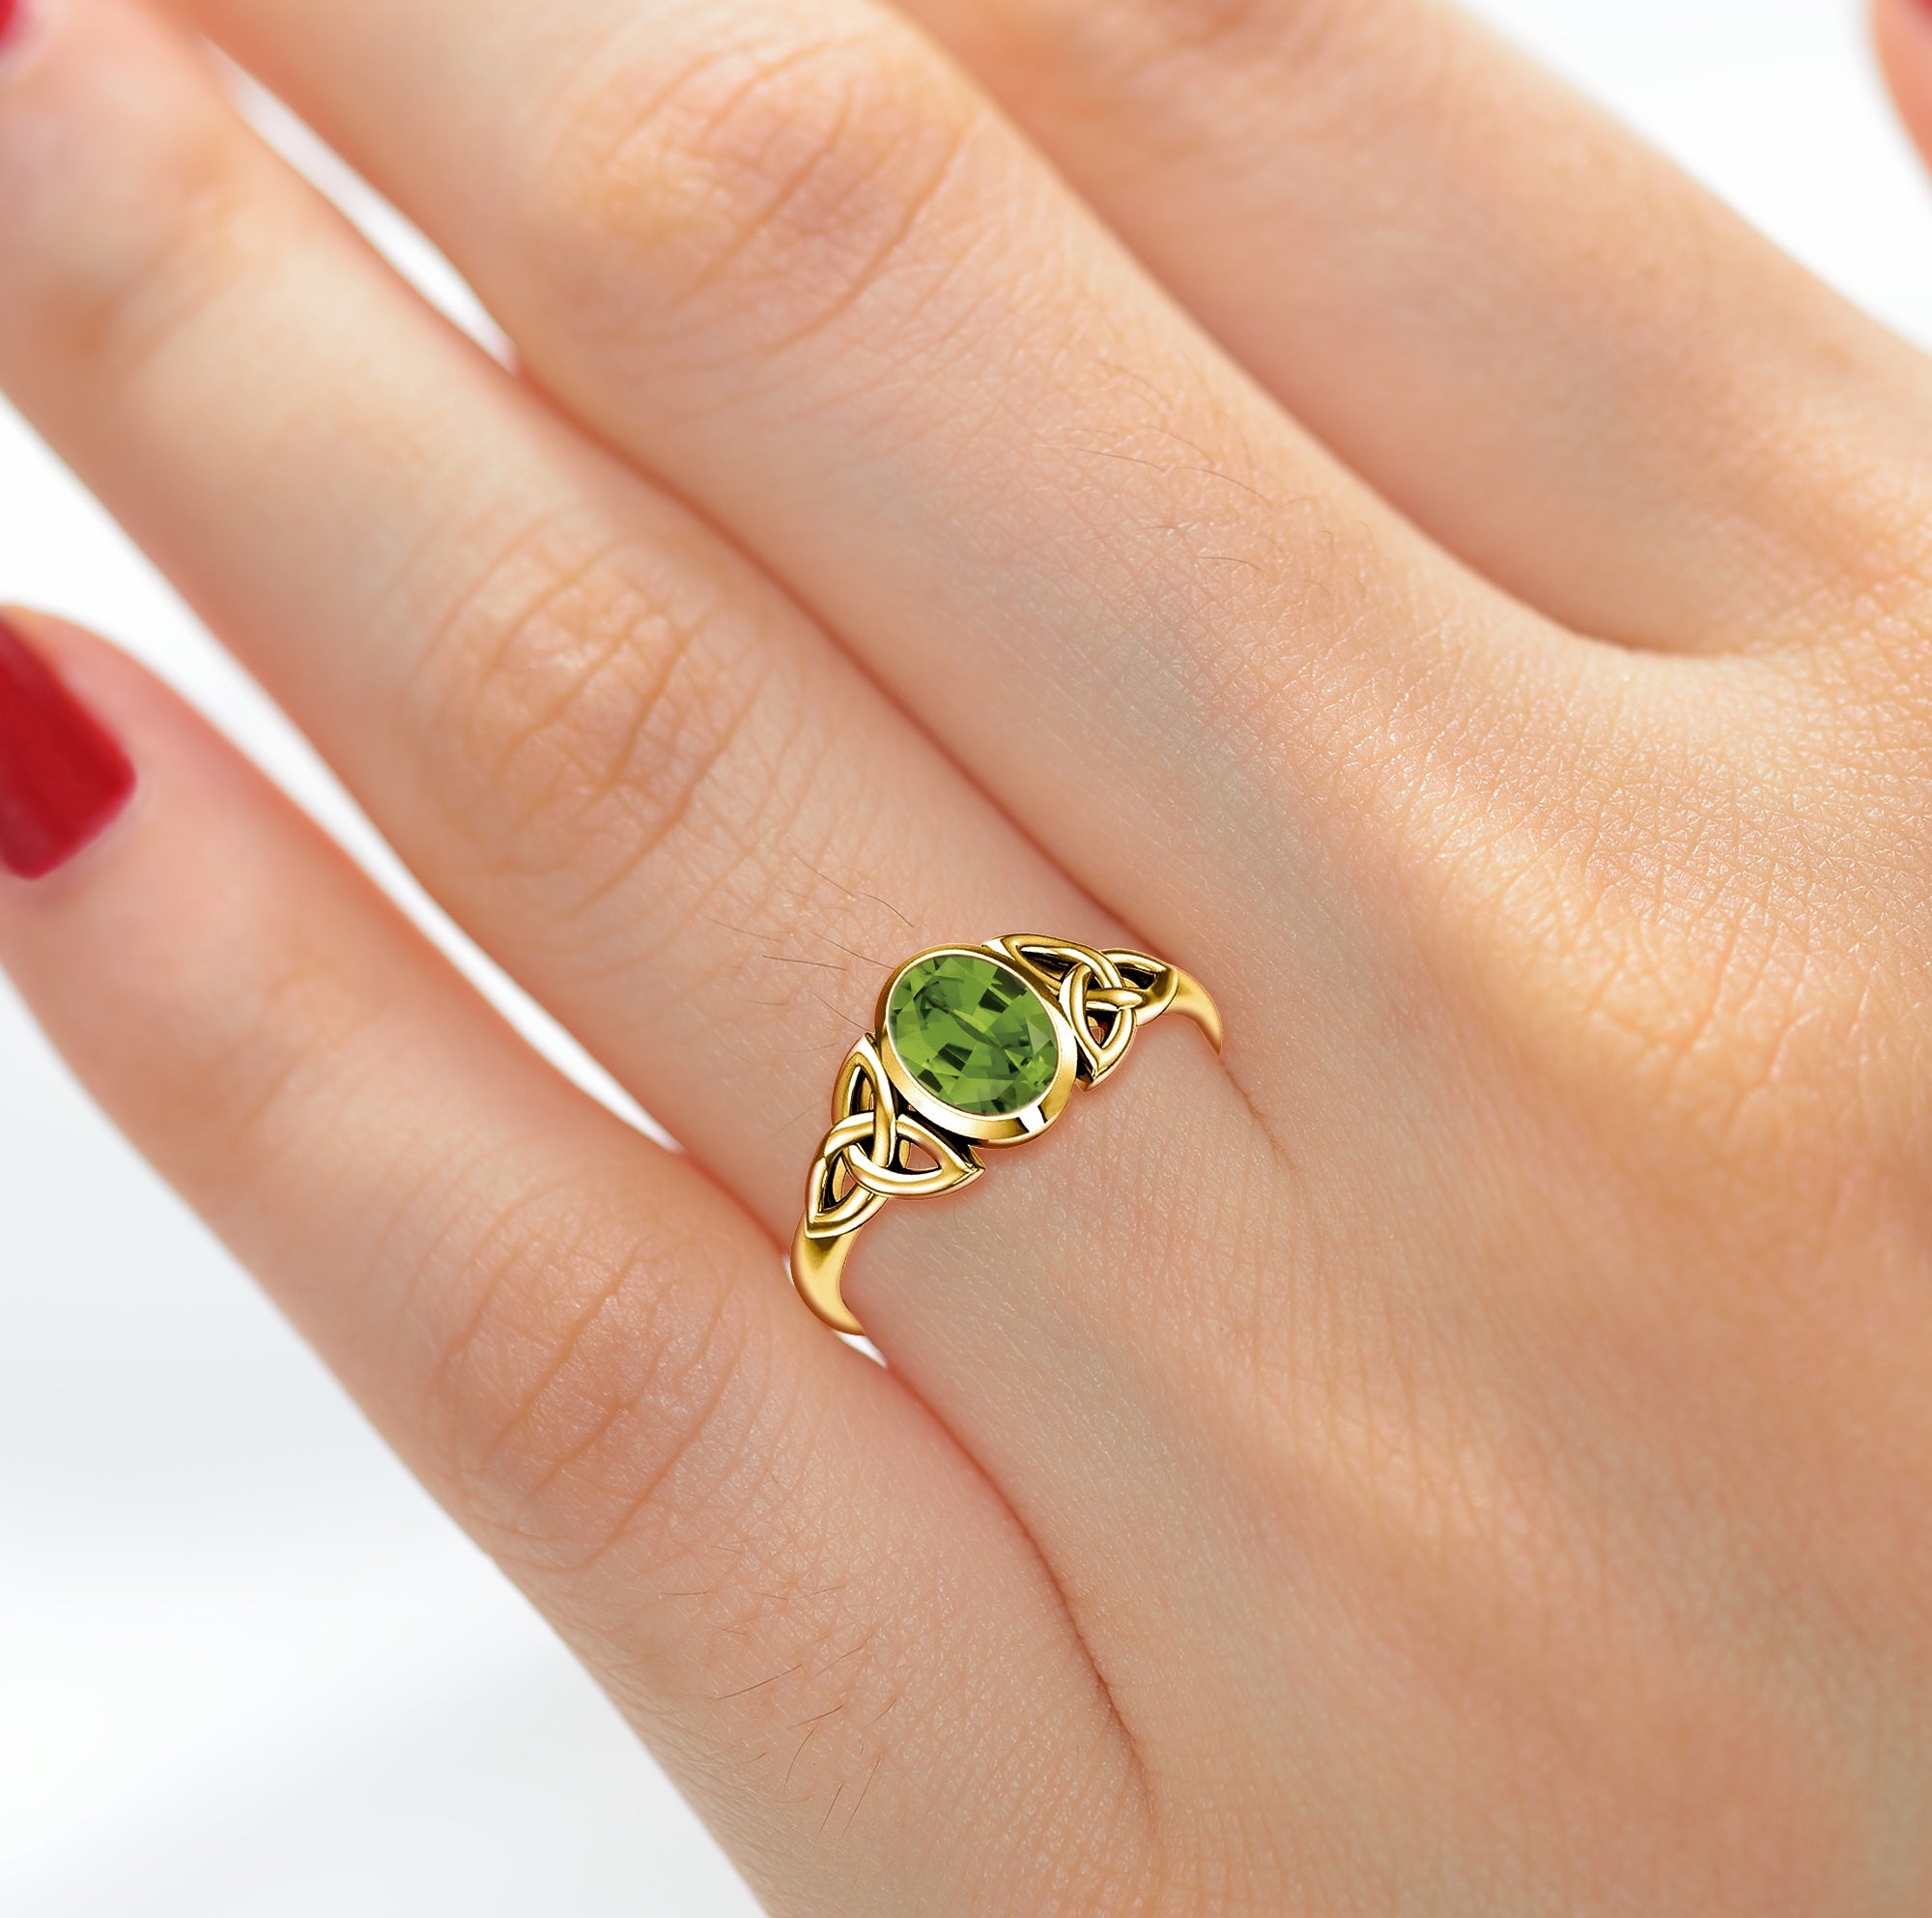 Buy Lustrous Peridot Ring , Sterling Silver and Genuine Peridot Rings for  Women, Green Round Gemstone Ring, August Birthstone Ring for Gifting Online  in India - Etsy